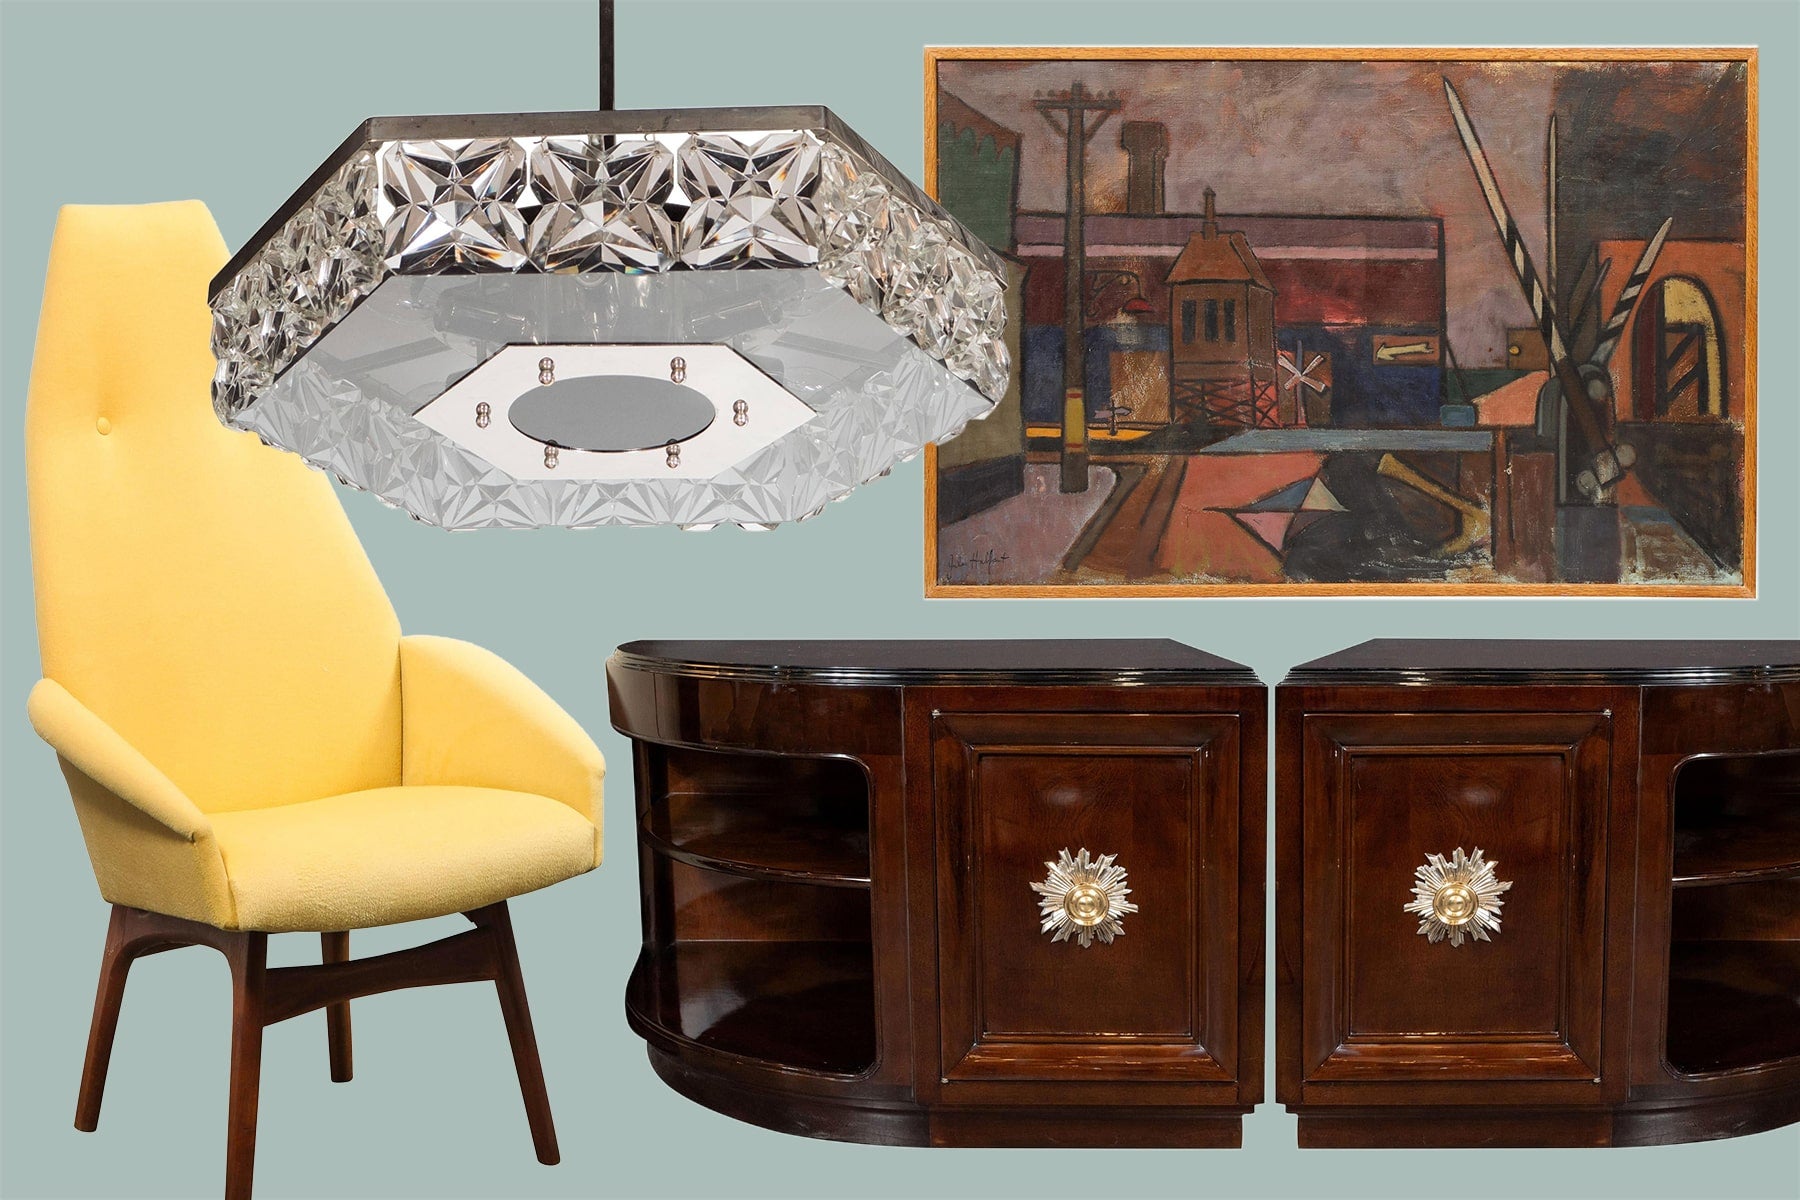 20th-Century Design Shines at the High Style Deco Auction